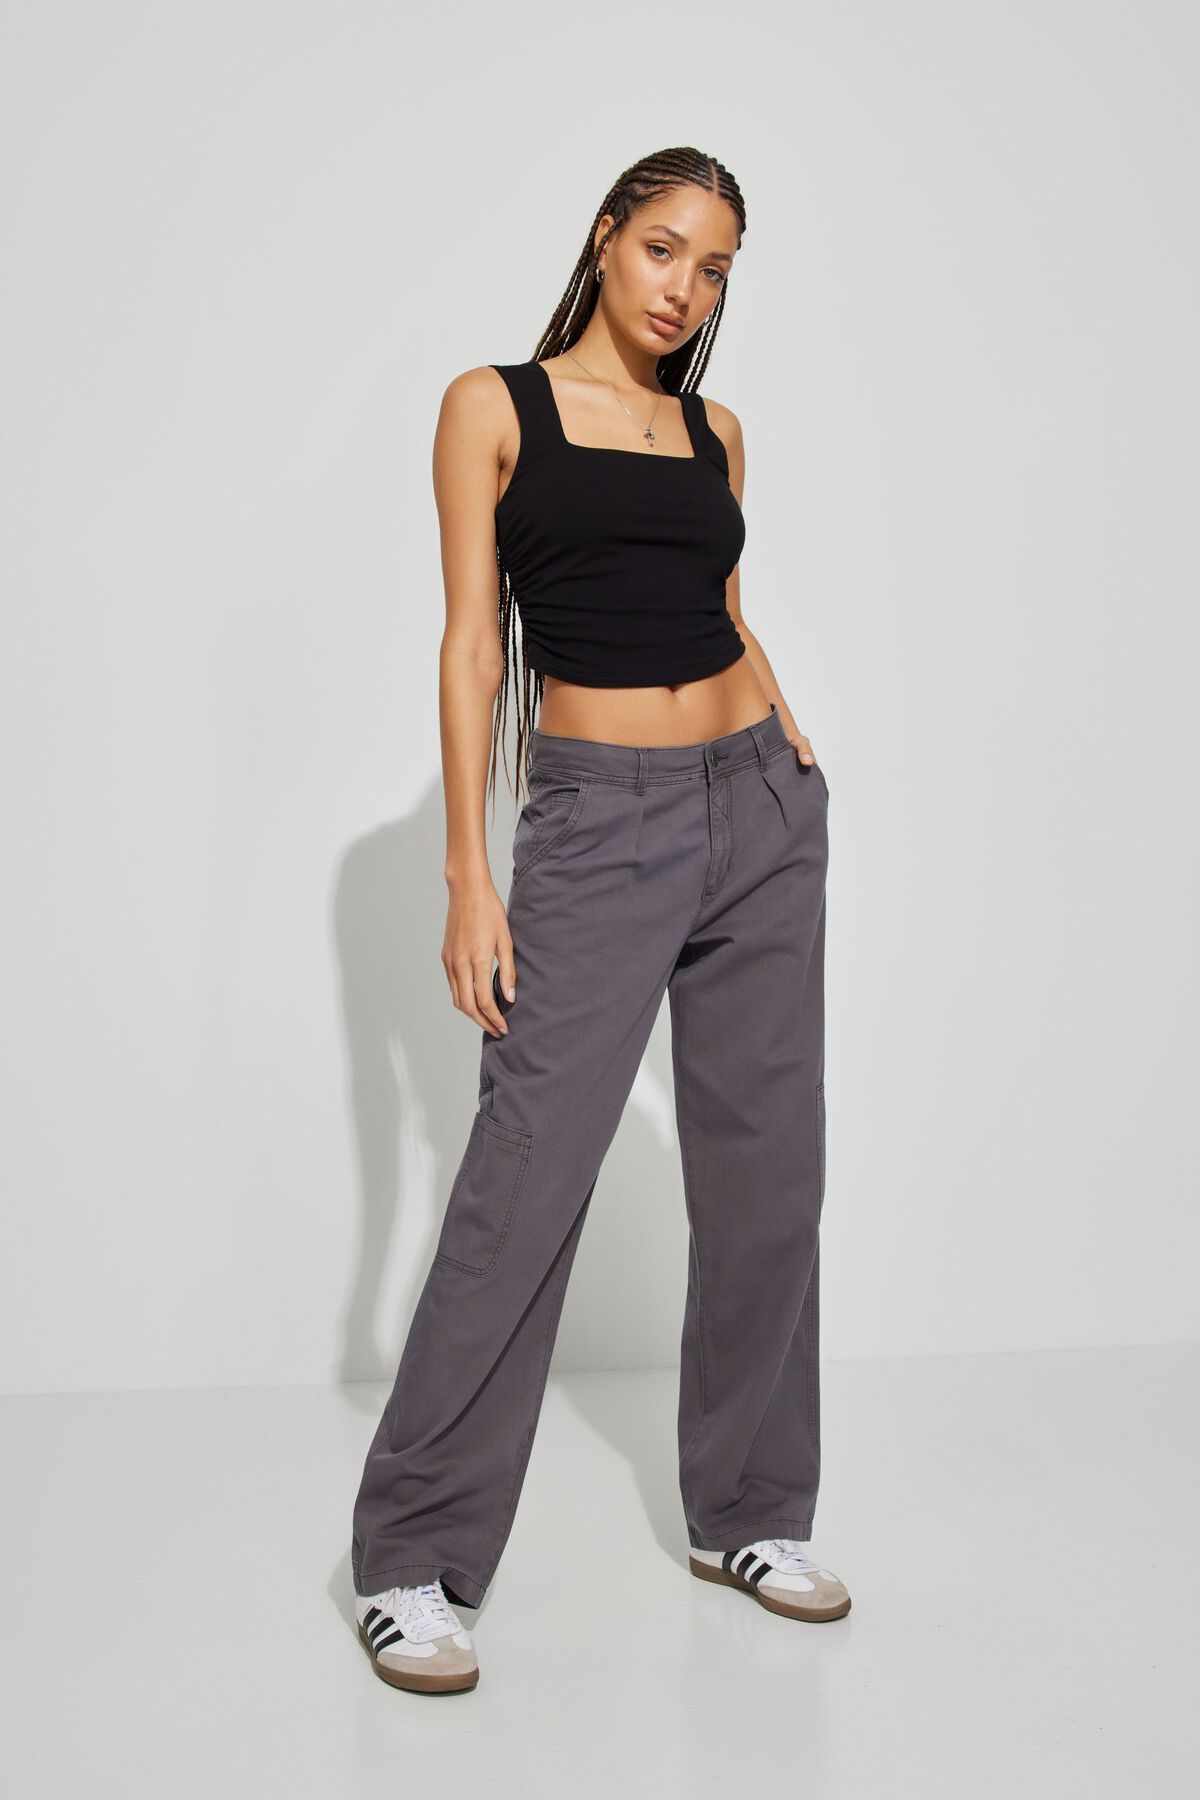 Grey Side Chain Carpenter Pants With Belt